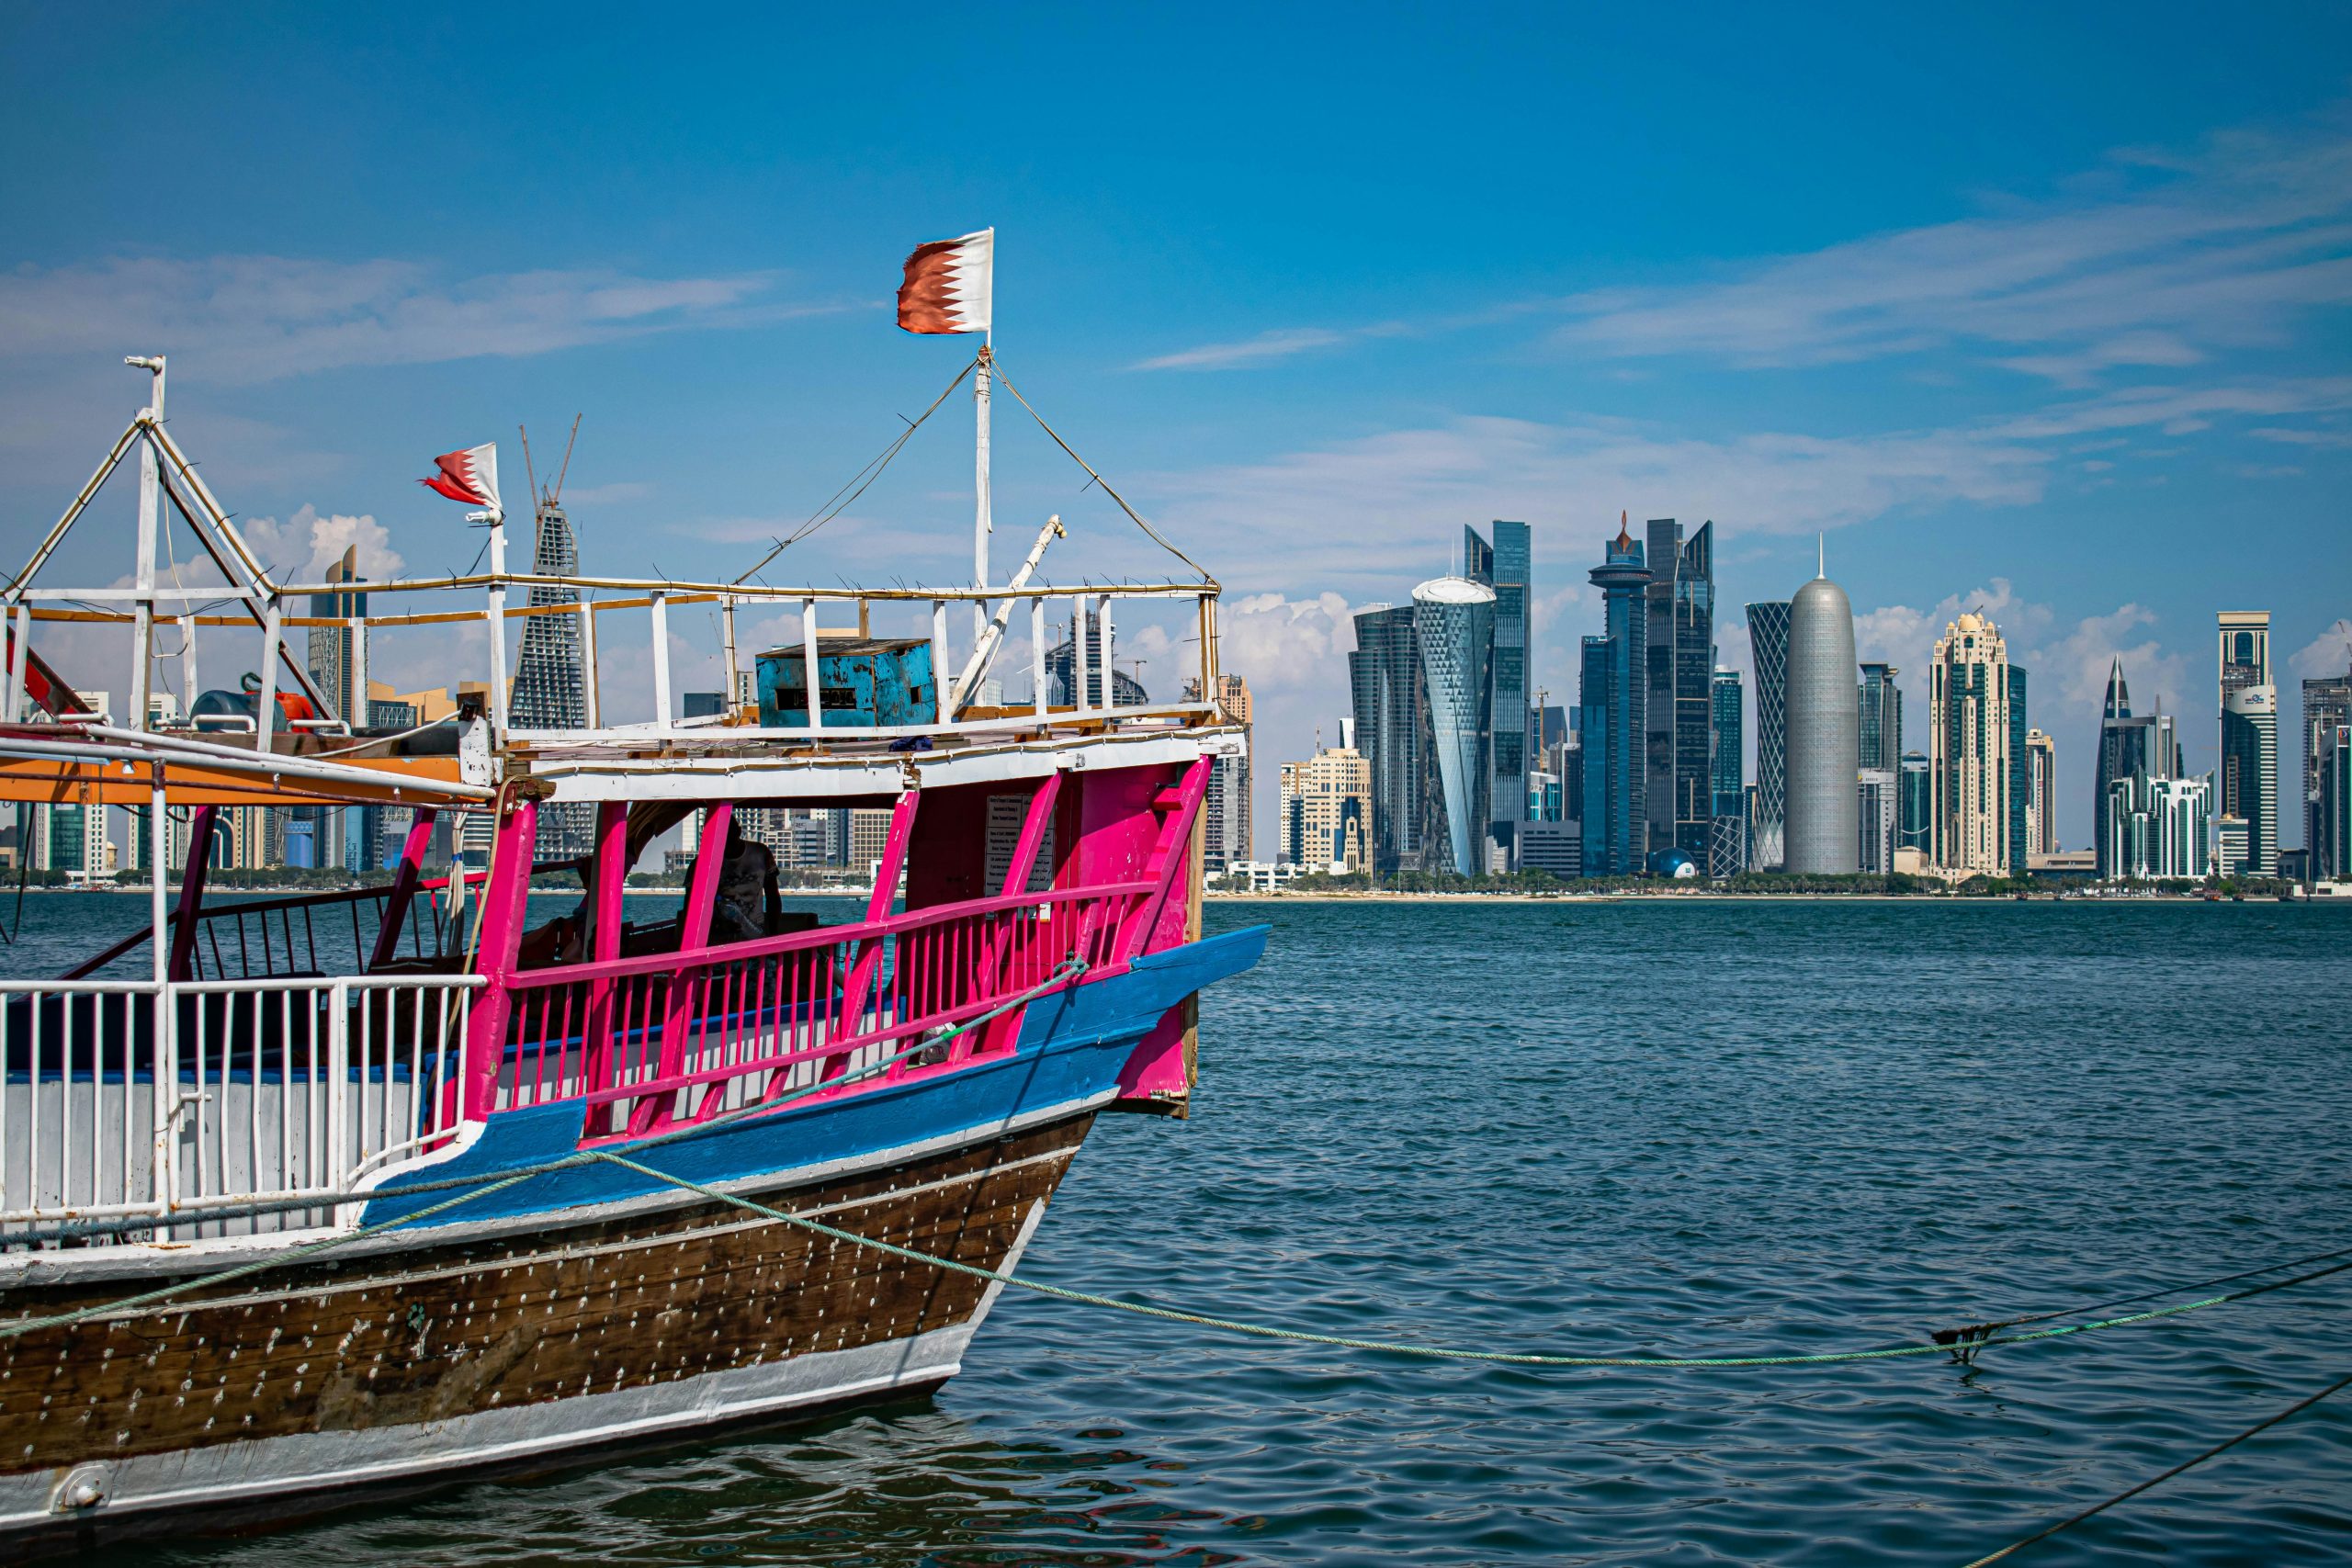 Qatar positioned fifth among the top 10 richest countries in the world